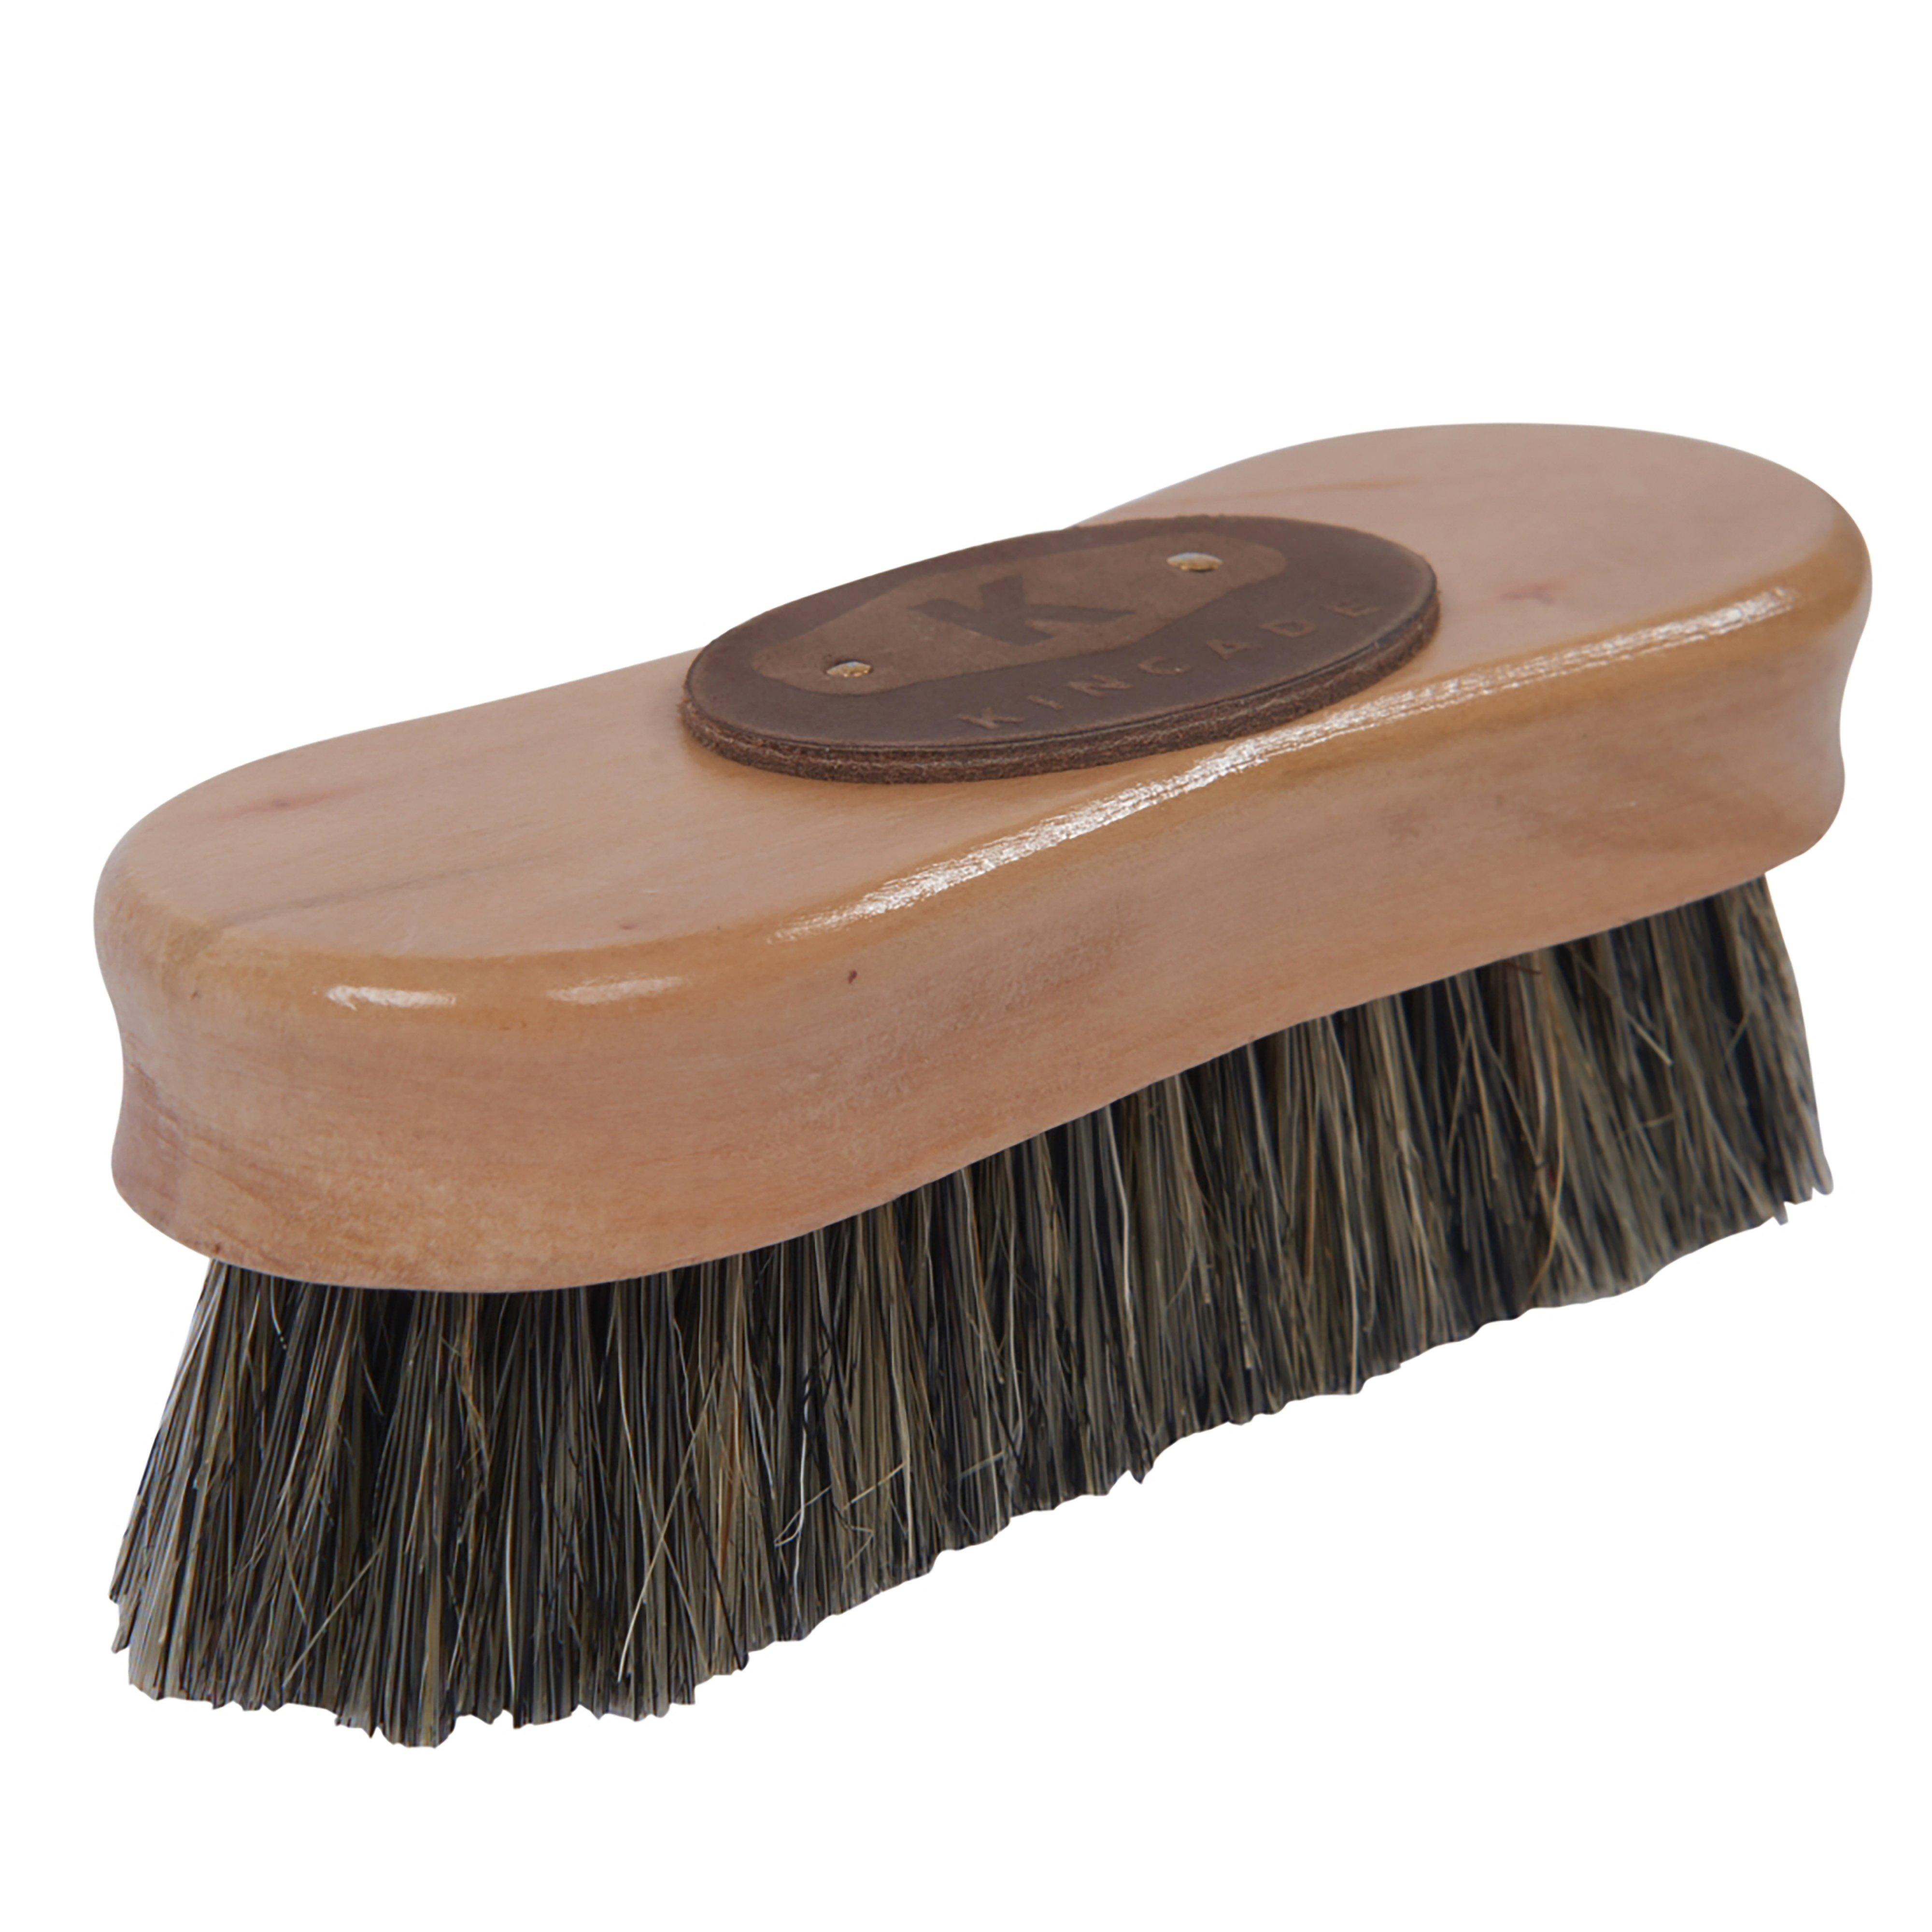 Wooden Deluxe Face Brush